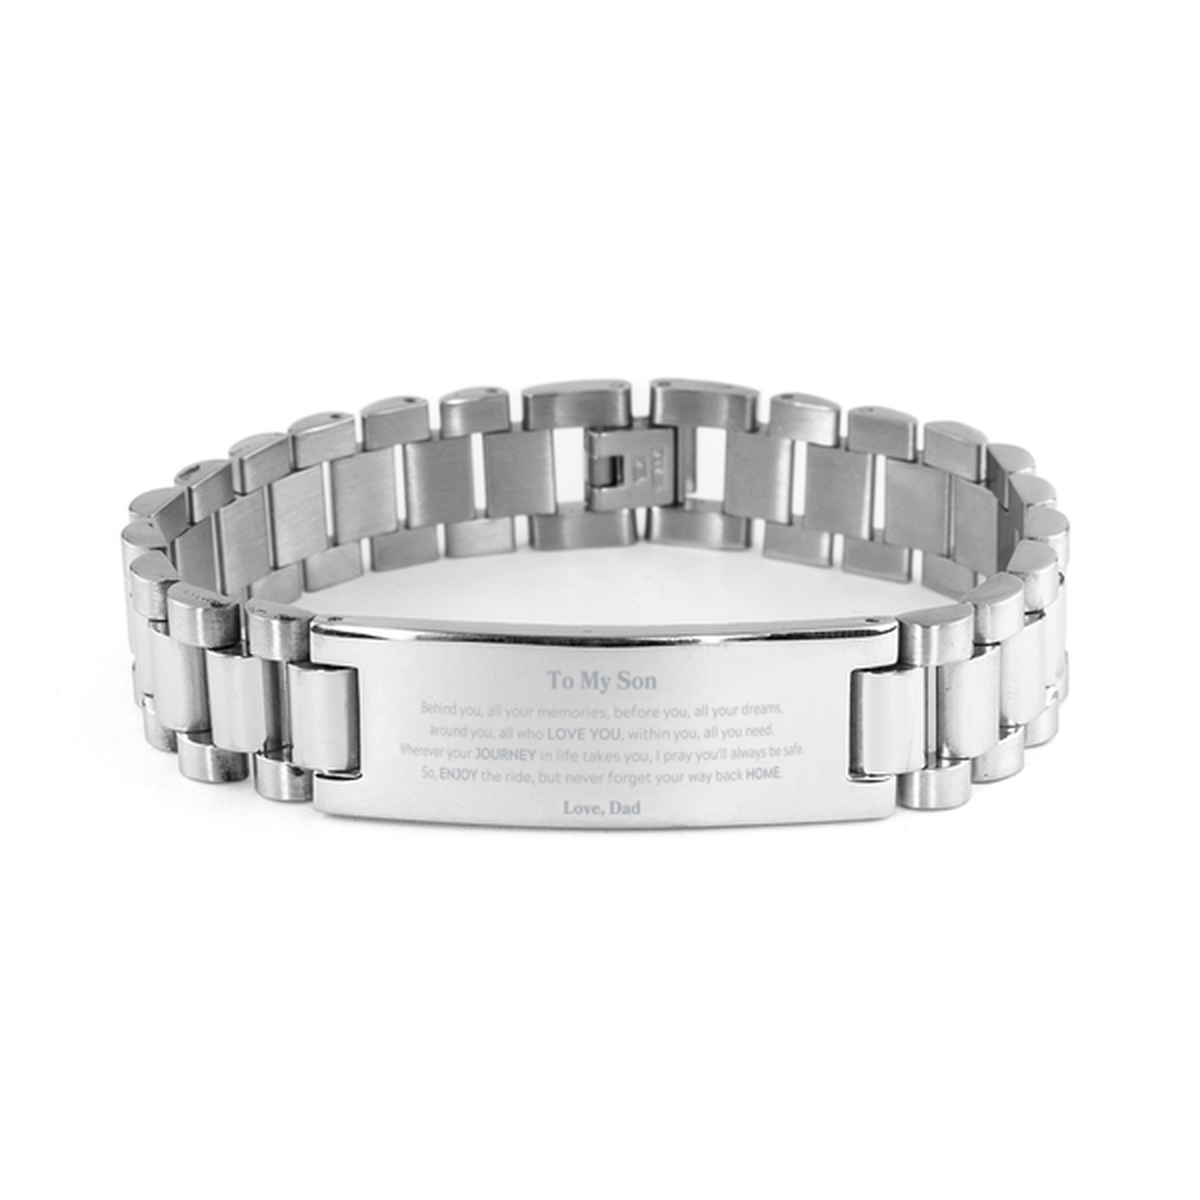 To My Son Graduation Gifts from Dad, Son Ladder Stainless Steel Bracelet Christmas Birthday Gifts for Son Behind you, all your memories, before you, all your dreams. Love, Dad